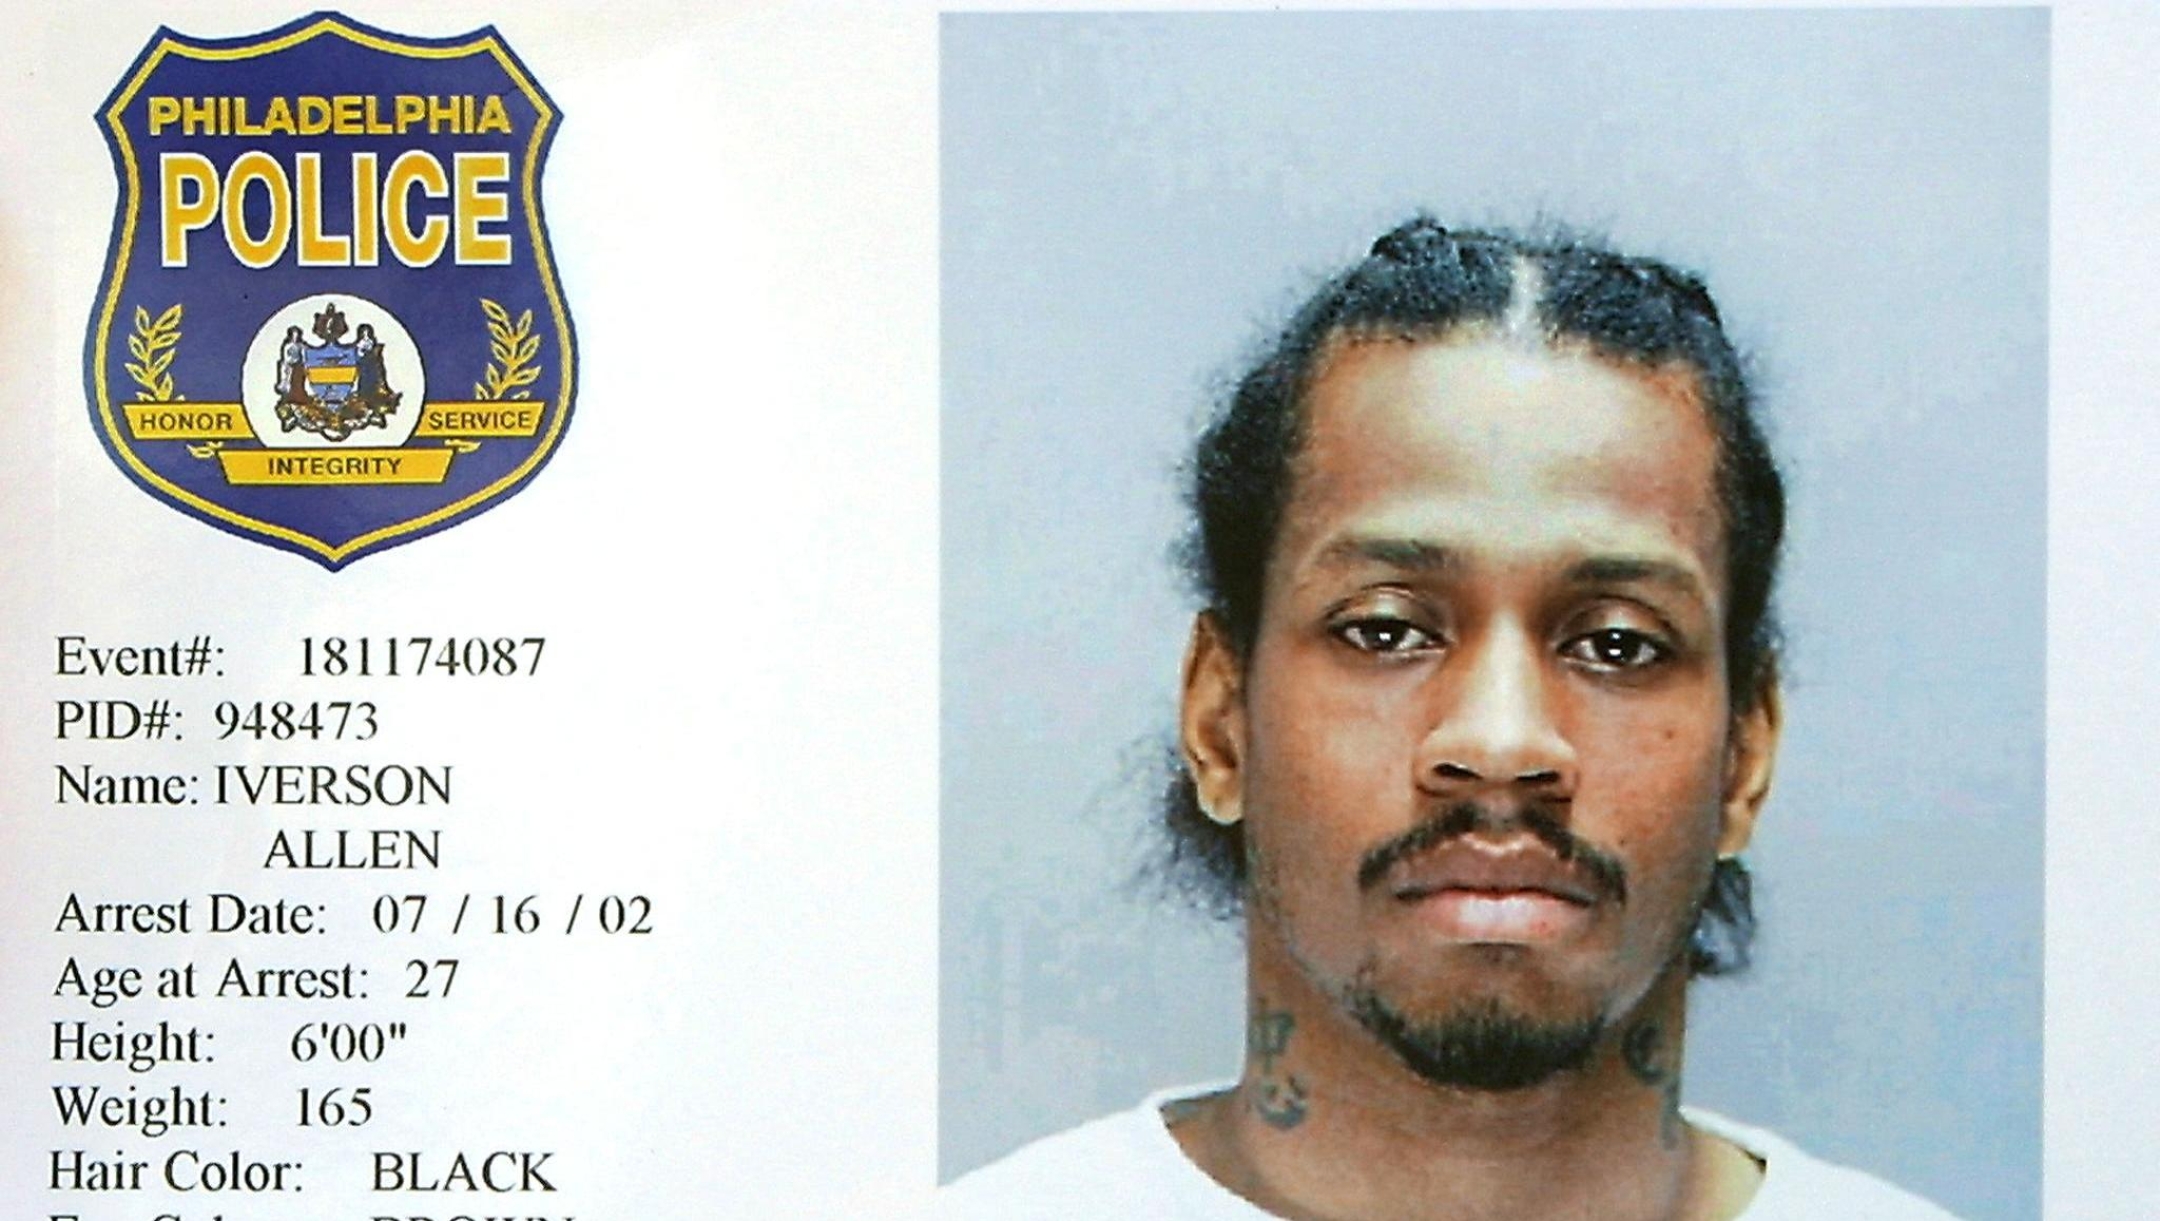 This offical Philadelphia Police Department booking photograph released 16 July 2002 shows Philadelphia 76ers guard Allen Iverson, who surrendered to police 16 July 2002 in Philadelphia on charges he threatened two men with a gun after barging into a cousin's apartment 03 July 2002.  Iverson was charged with criminal trespassing, assault, false imprisonment, conspiracy, firearms violations and other offenses that could bring a maximum of 70 years in prison, although lawyers involved in the case have told newspapers they doubt he will serve any jail time.    AFP PHOTO/PHILADELPHIA POLICE DEPT. (Photo by PHILADELPHIA POLICE DEPARTMENT / AFP)